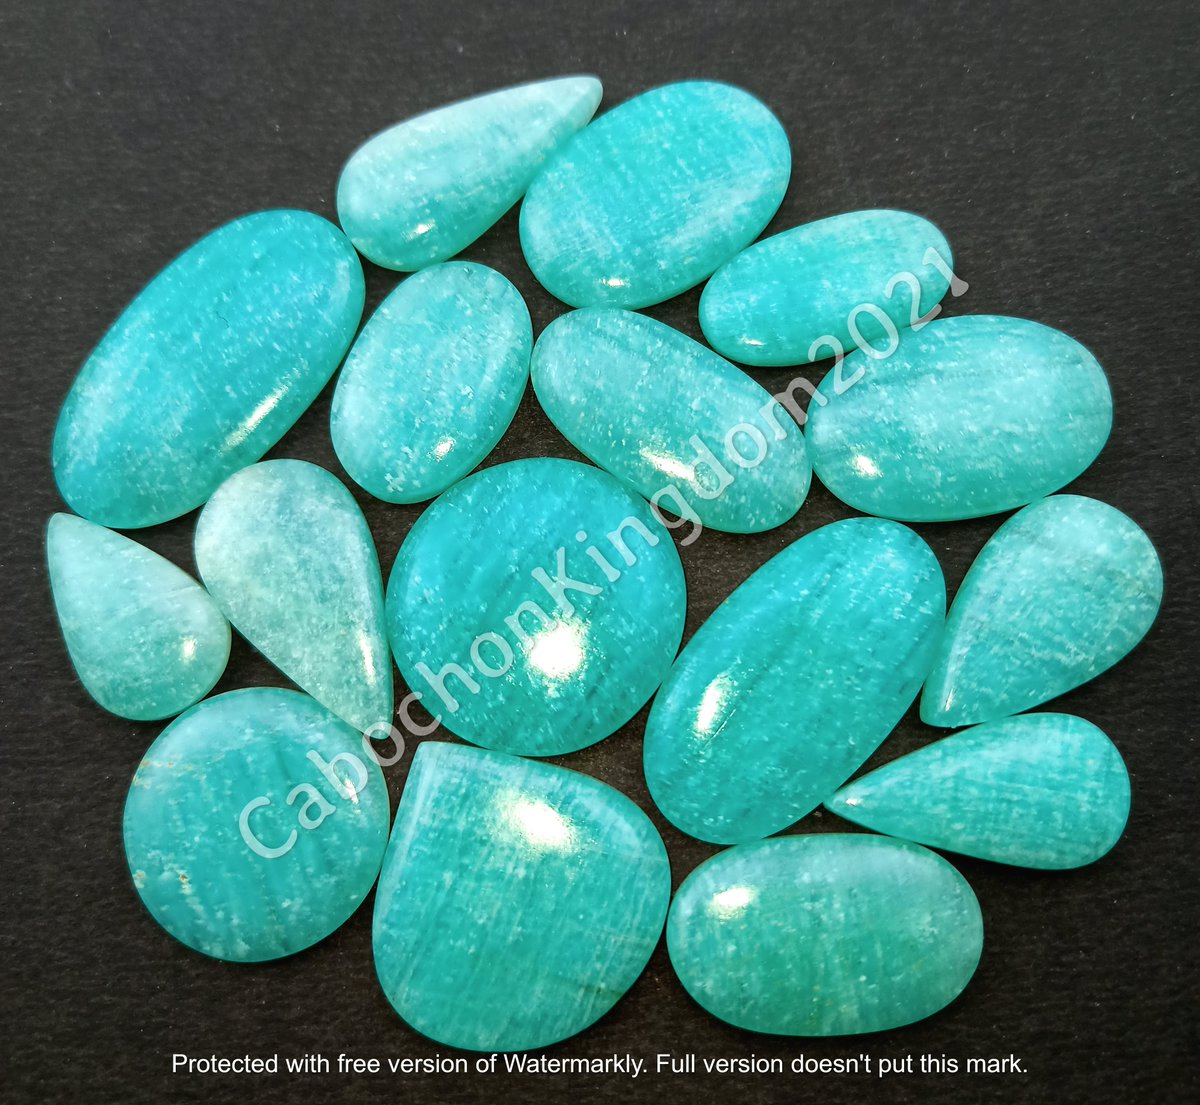 Natural Amazonite Cabochon Gemstone 

$6 Each Random Pick
Size 25to40 mm Approx
Free Drilling Service Available On Request
Shipping$6 Combine Shipping Available

#amazonite #amazonitejewelry #amazonitestone #amazonitebracelet #amazonitenecklace #amazonitecrystal #amazonitering